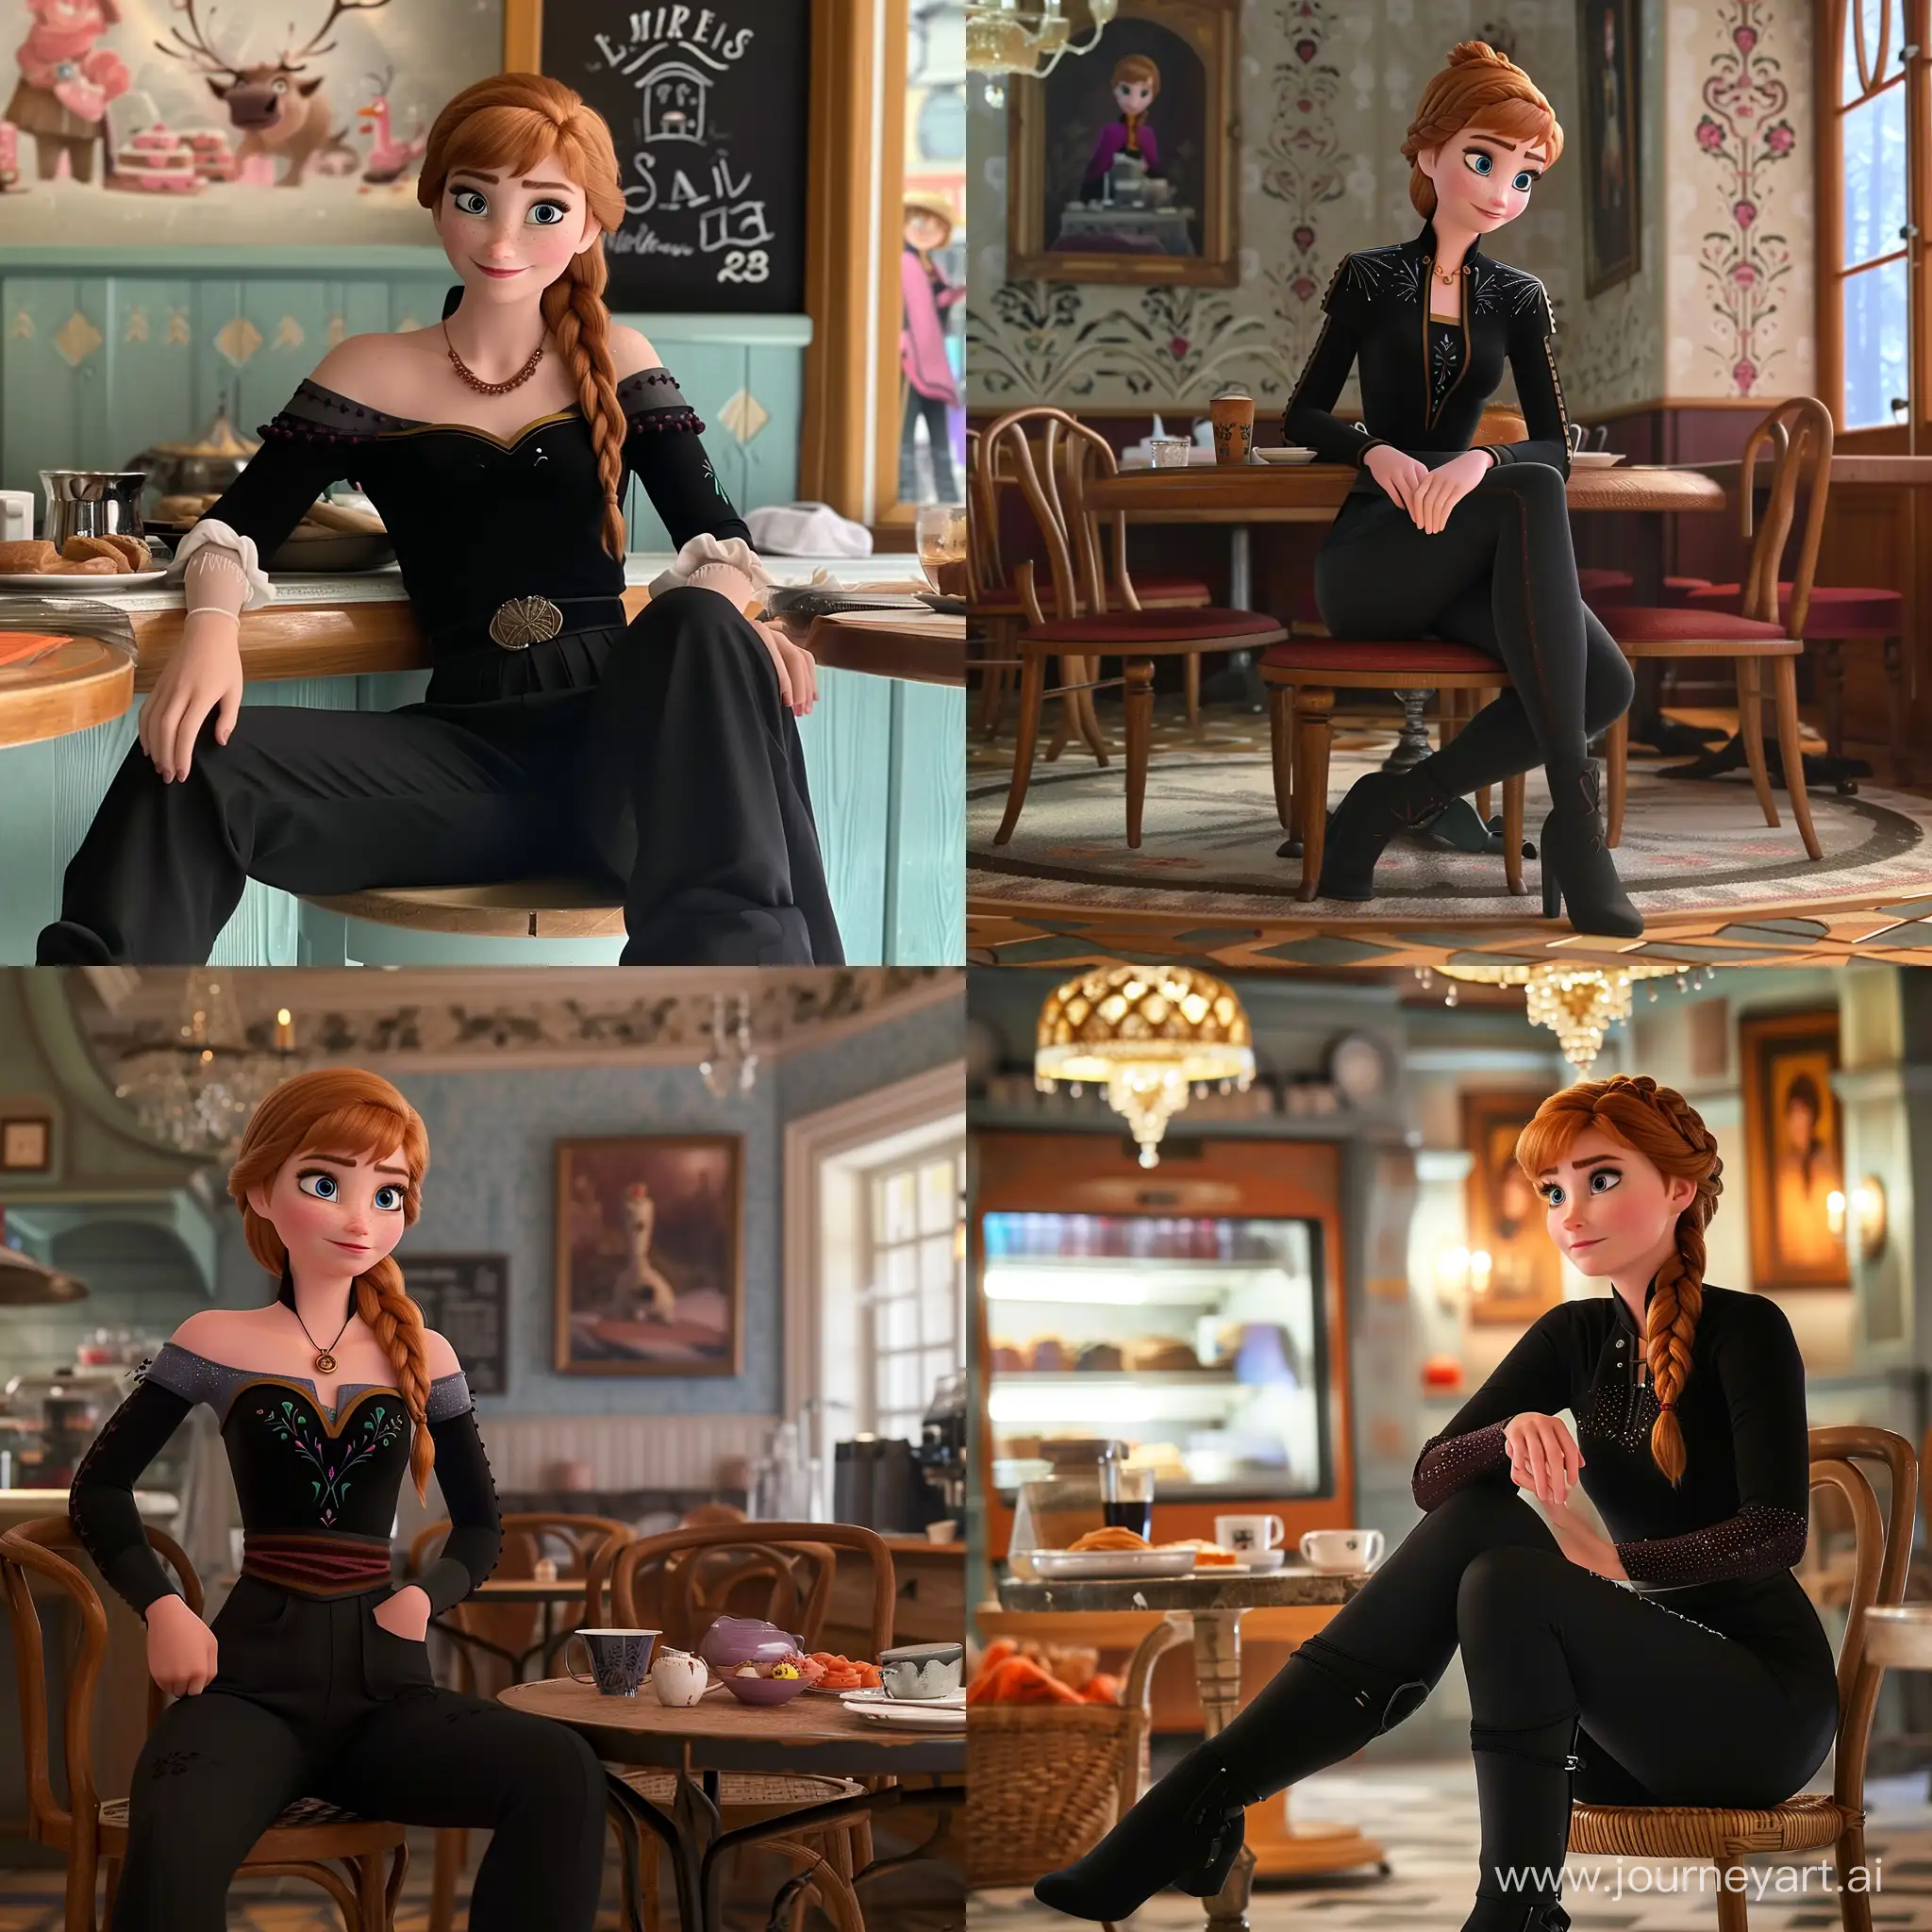 Frozen 2 movie Anna, 25 years old, wearing black pants and top, sitting in the cafe